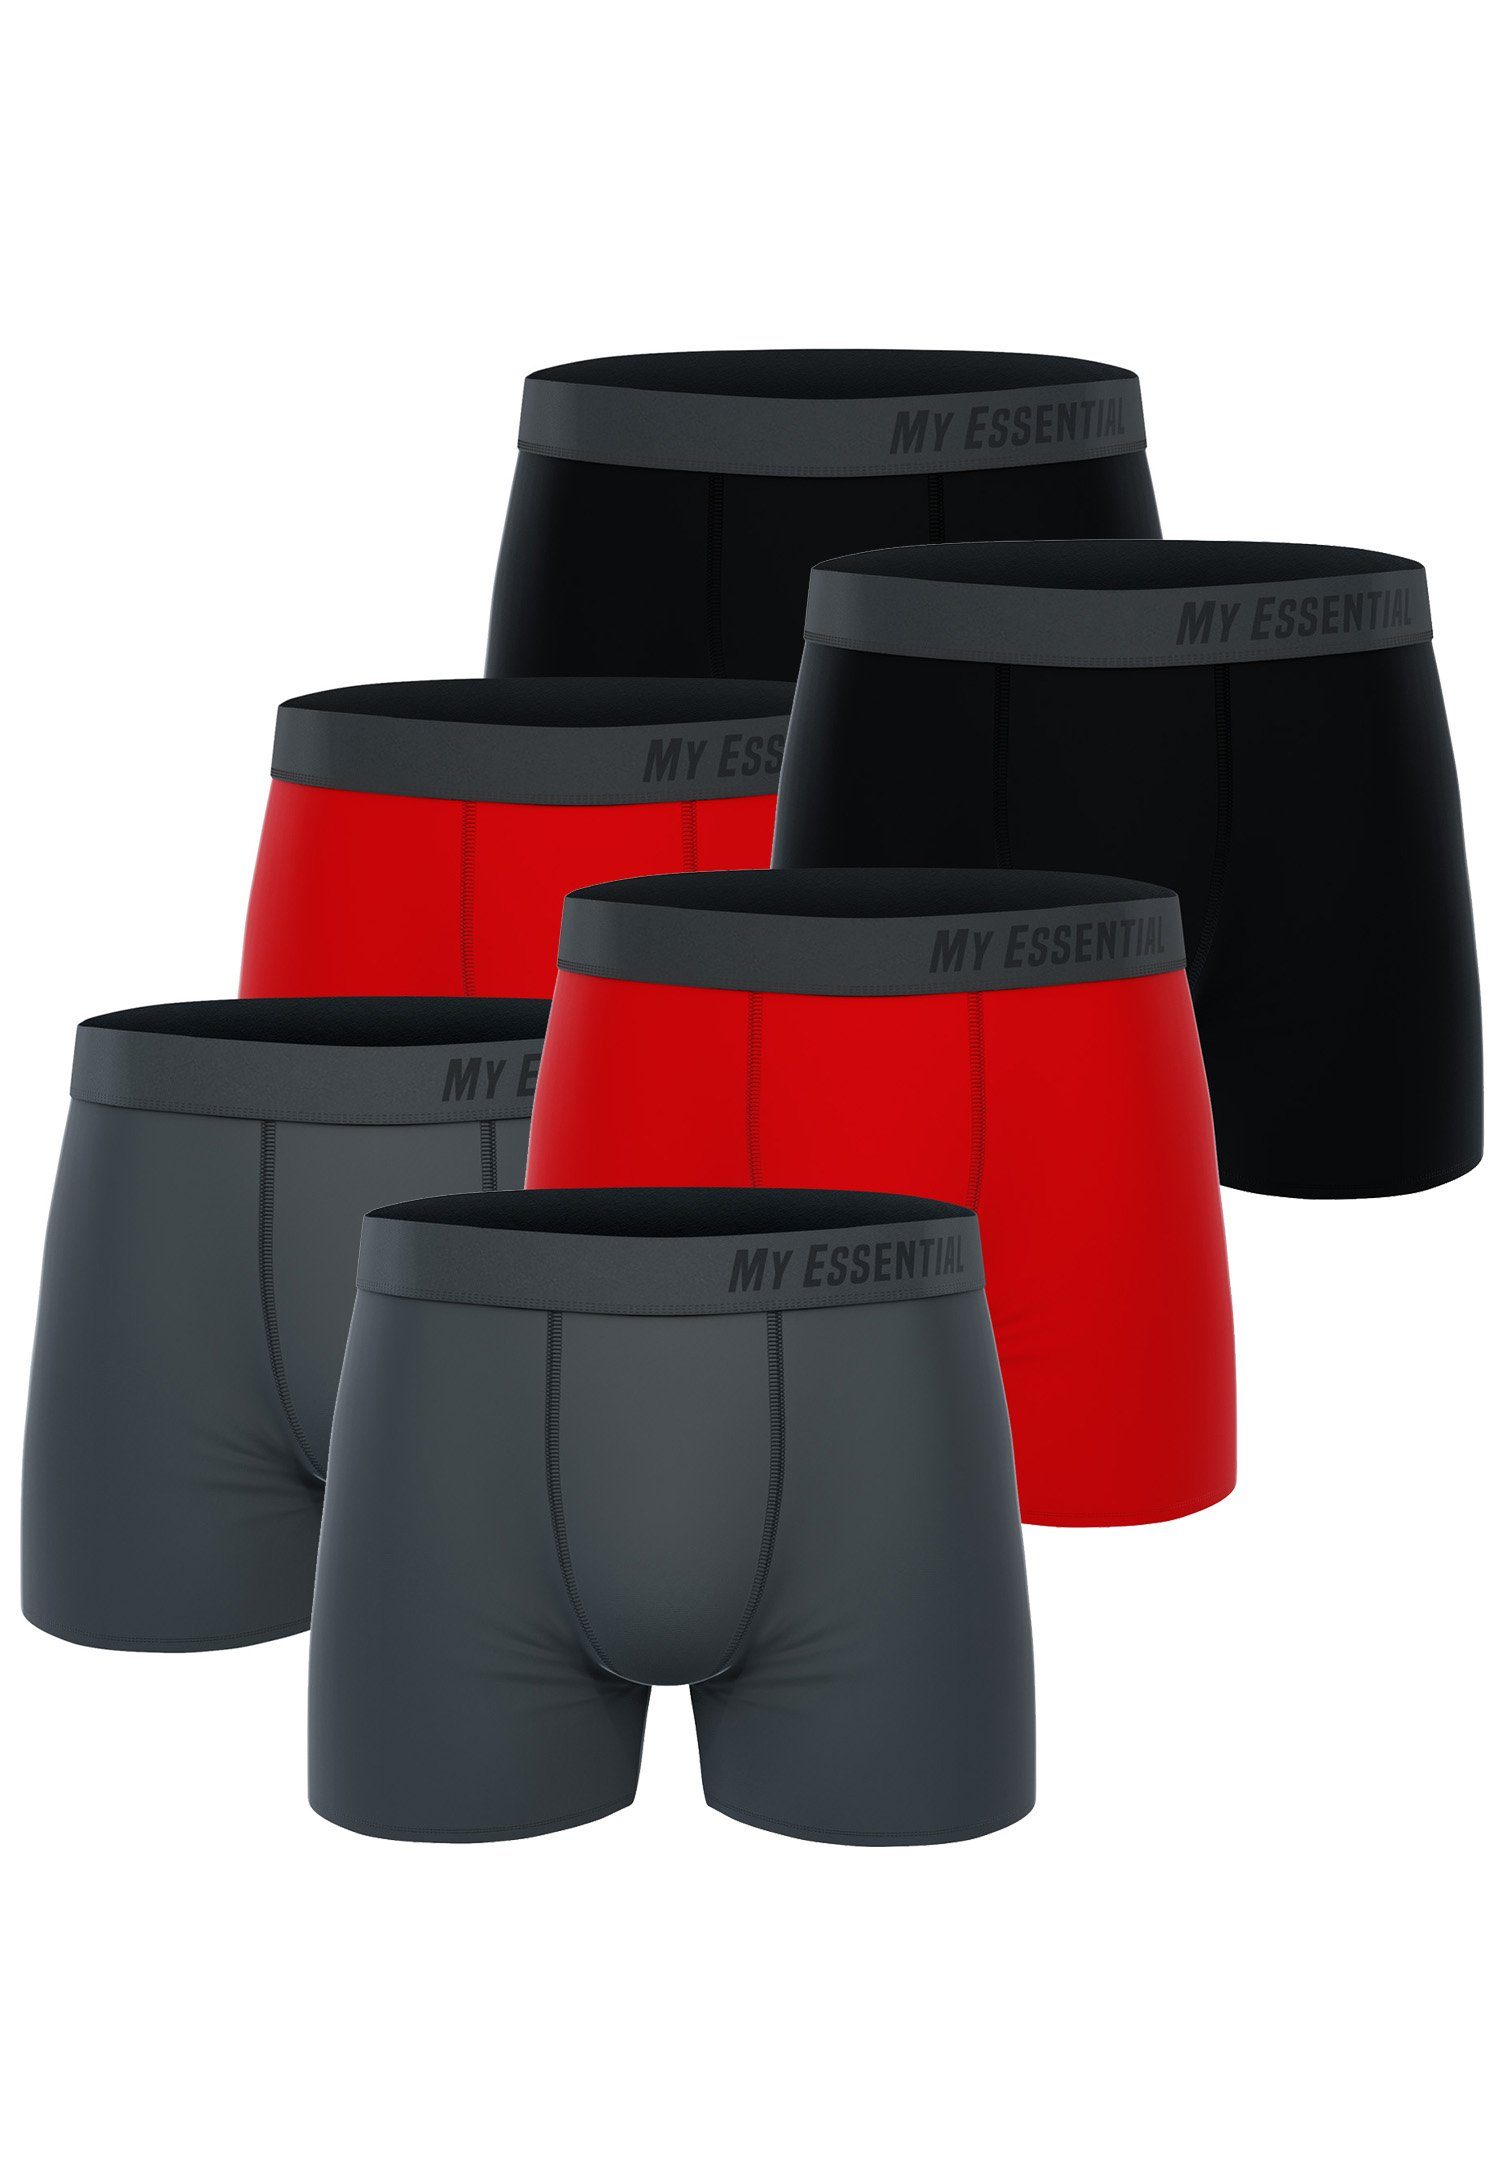 Pack 6-St., Essential Cotton Boxers Essential My My Bio Clothing Boxershorts Red (Spar-Pack, 6er-Pack) 6